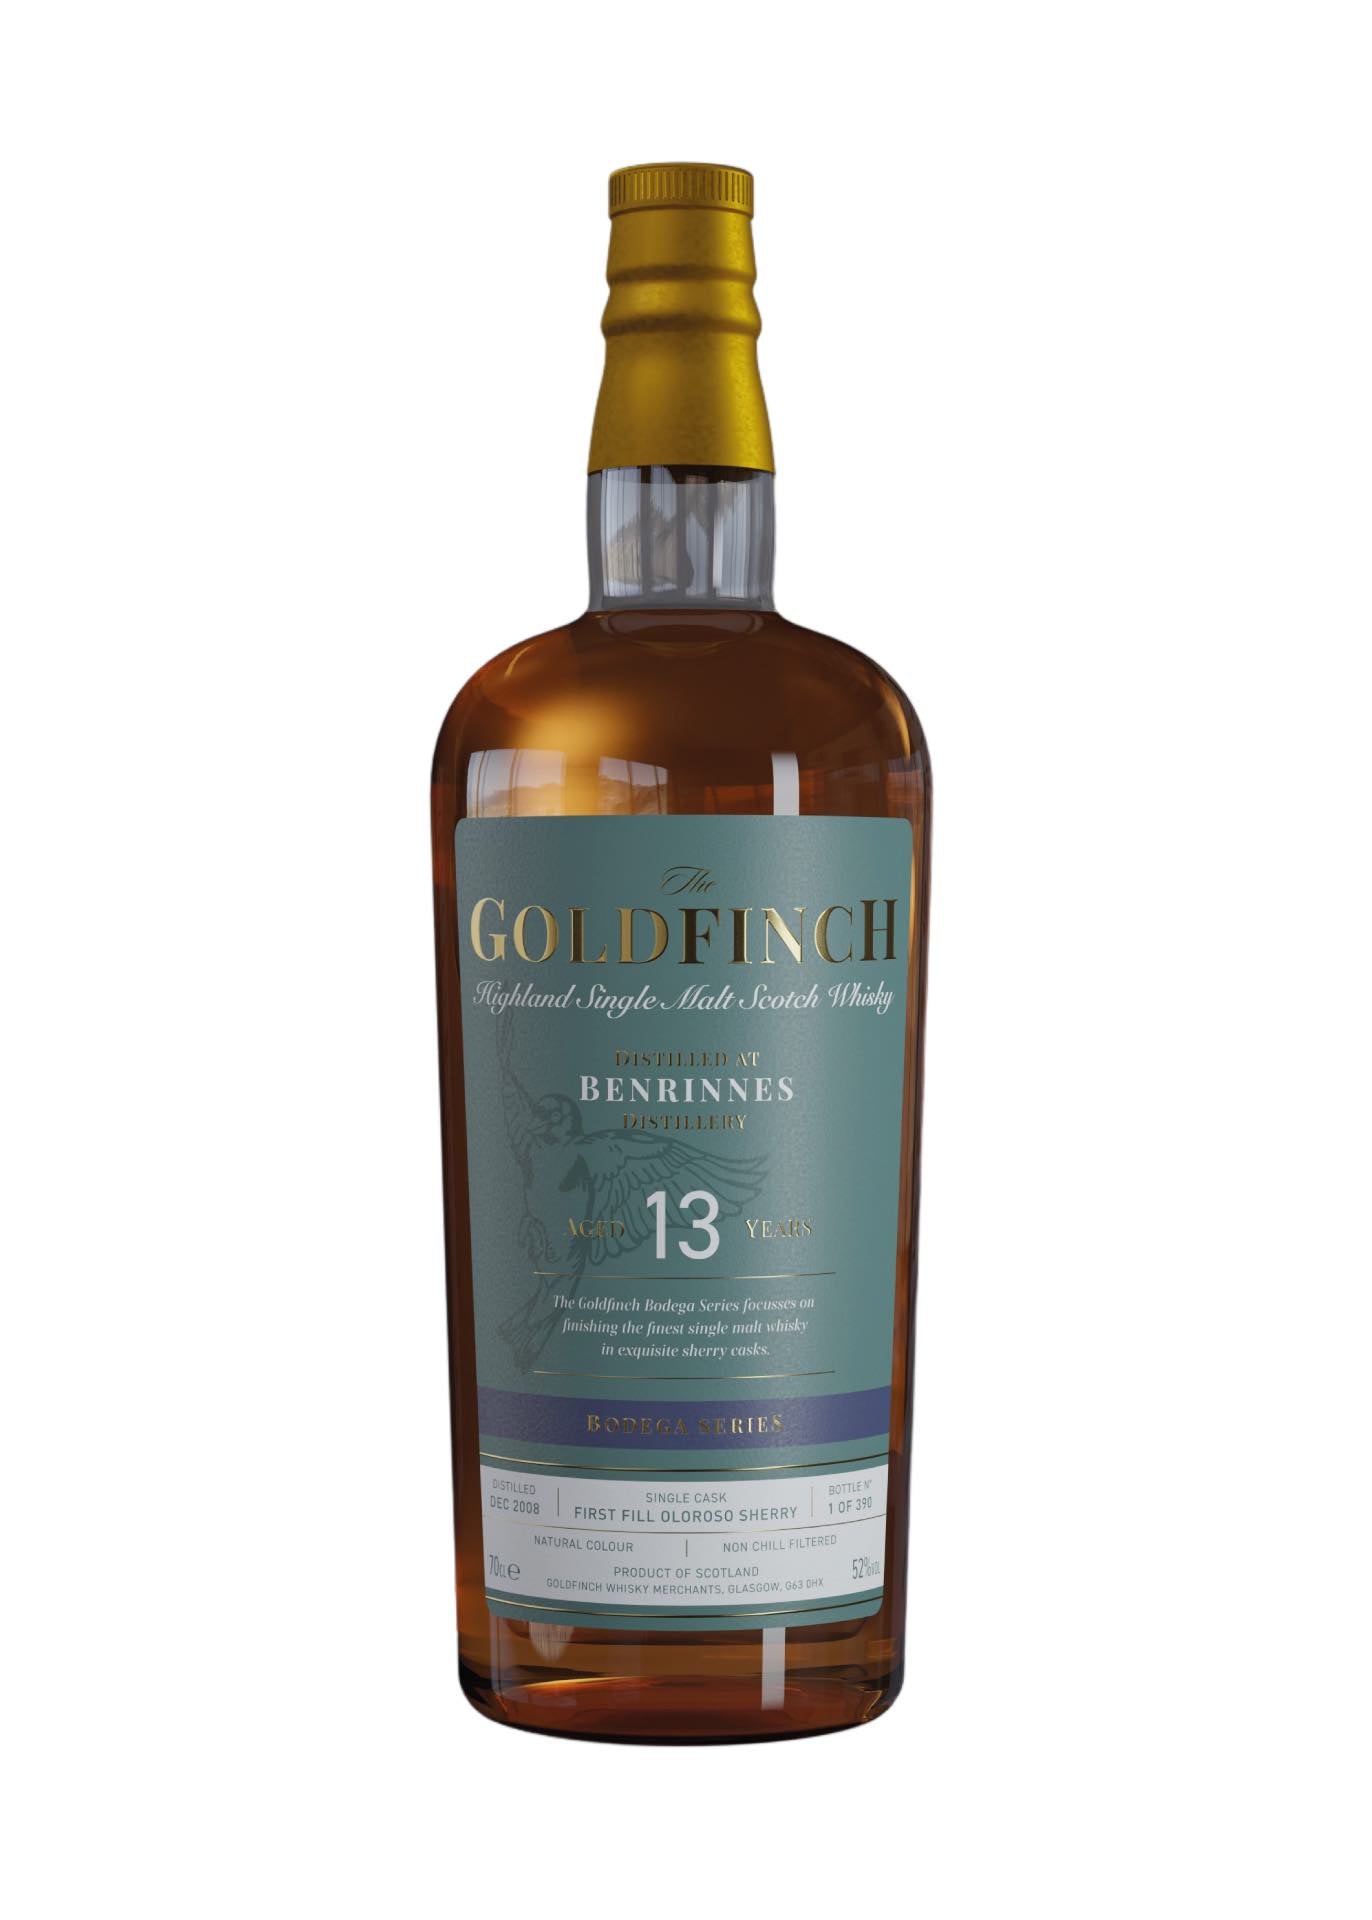 Goldfinch Benrinnes 13 Year Old Single Cask Whisky